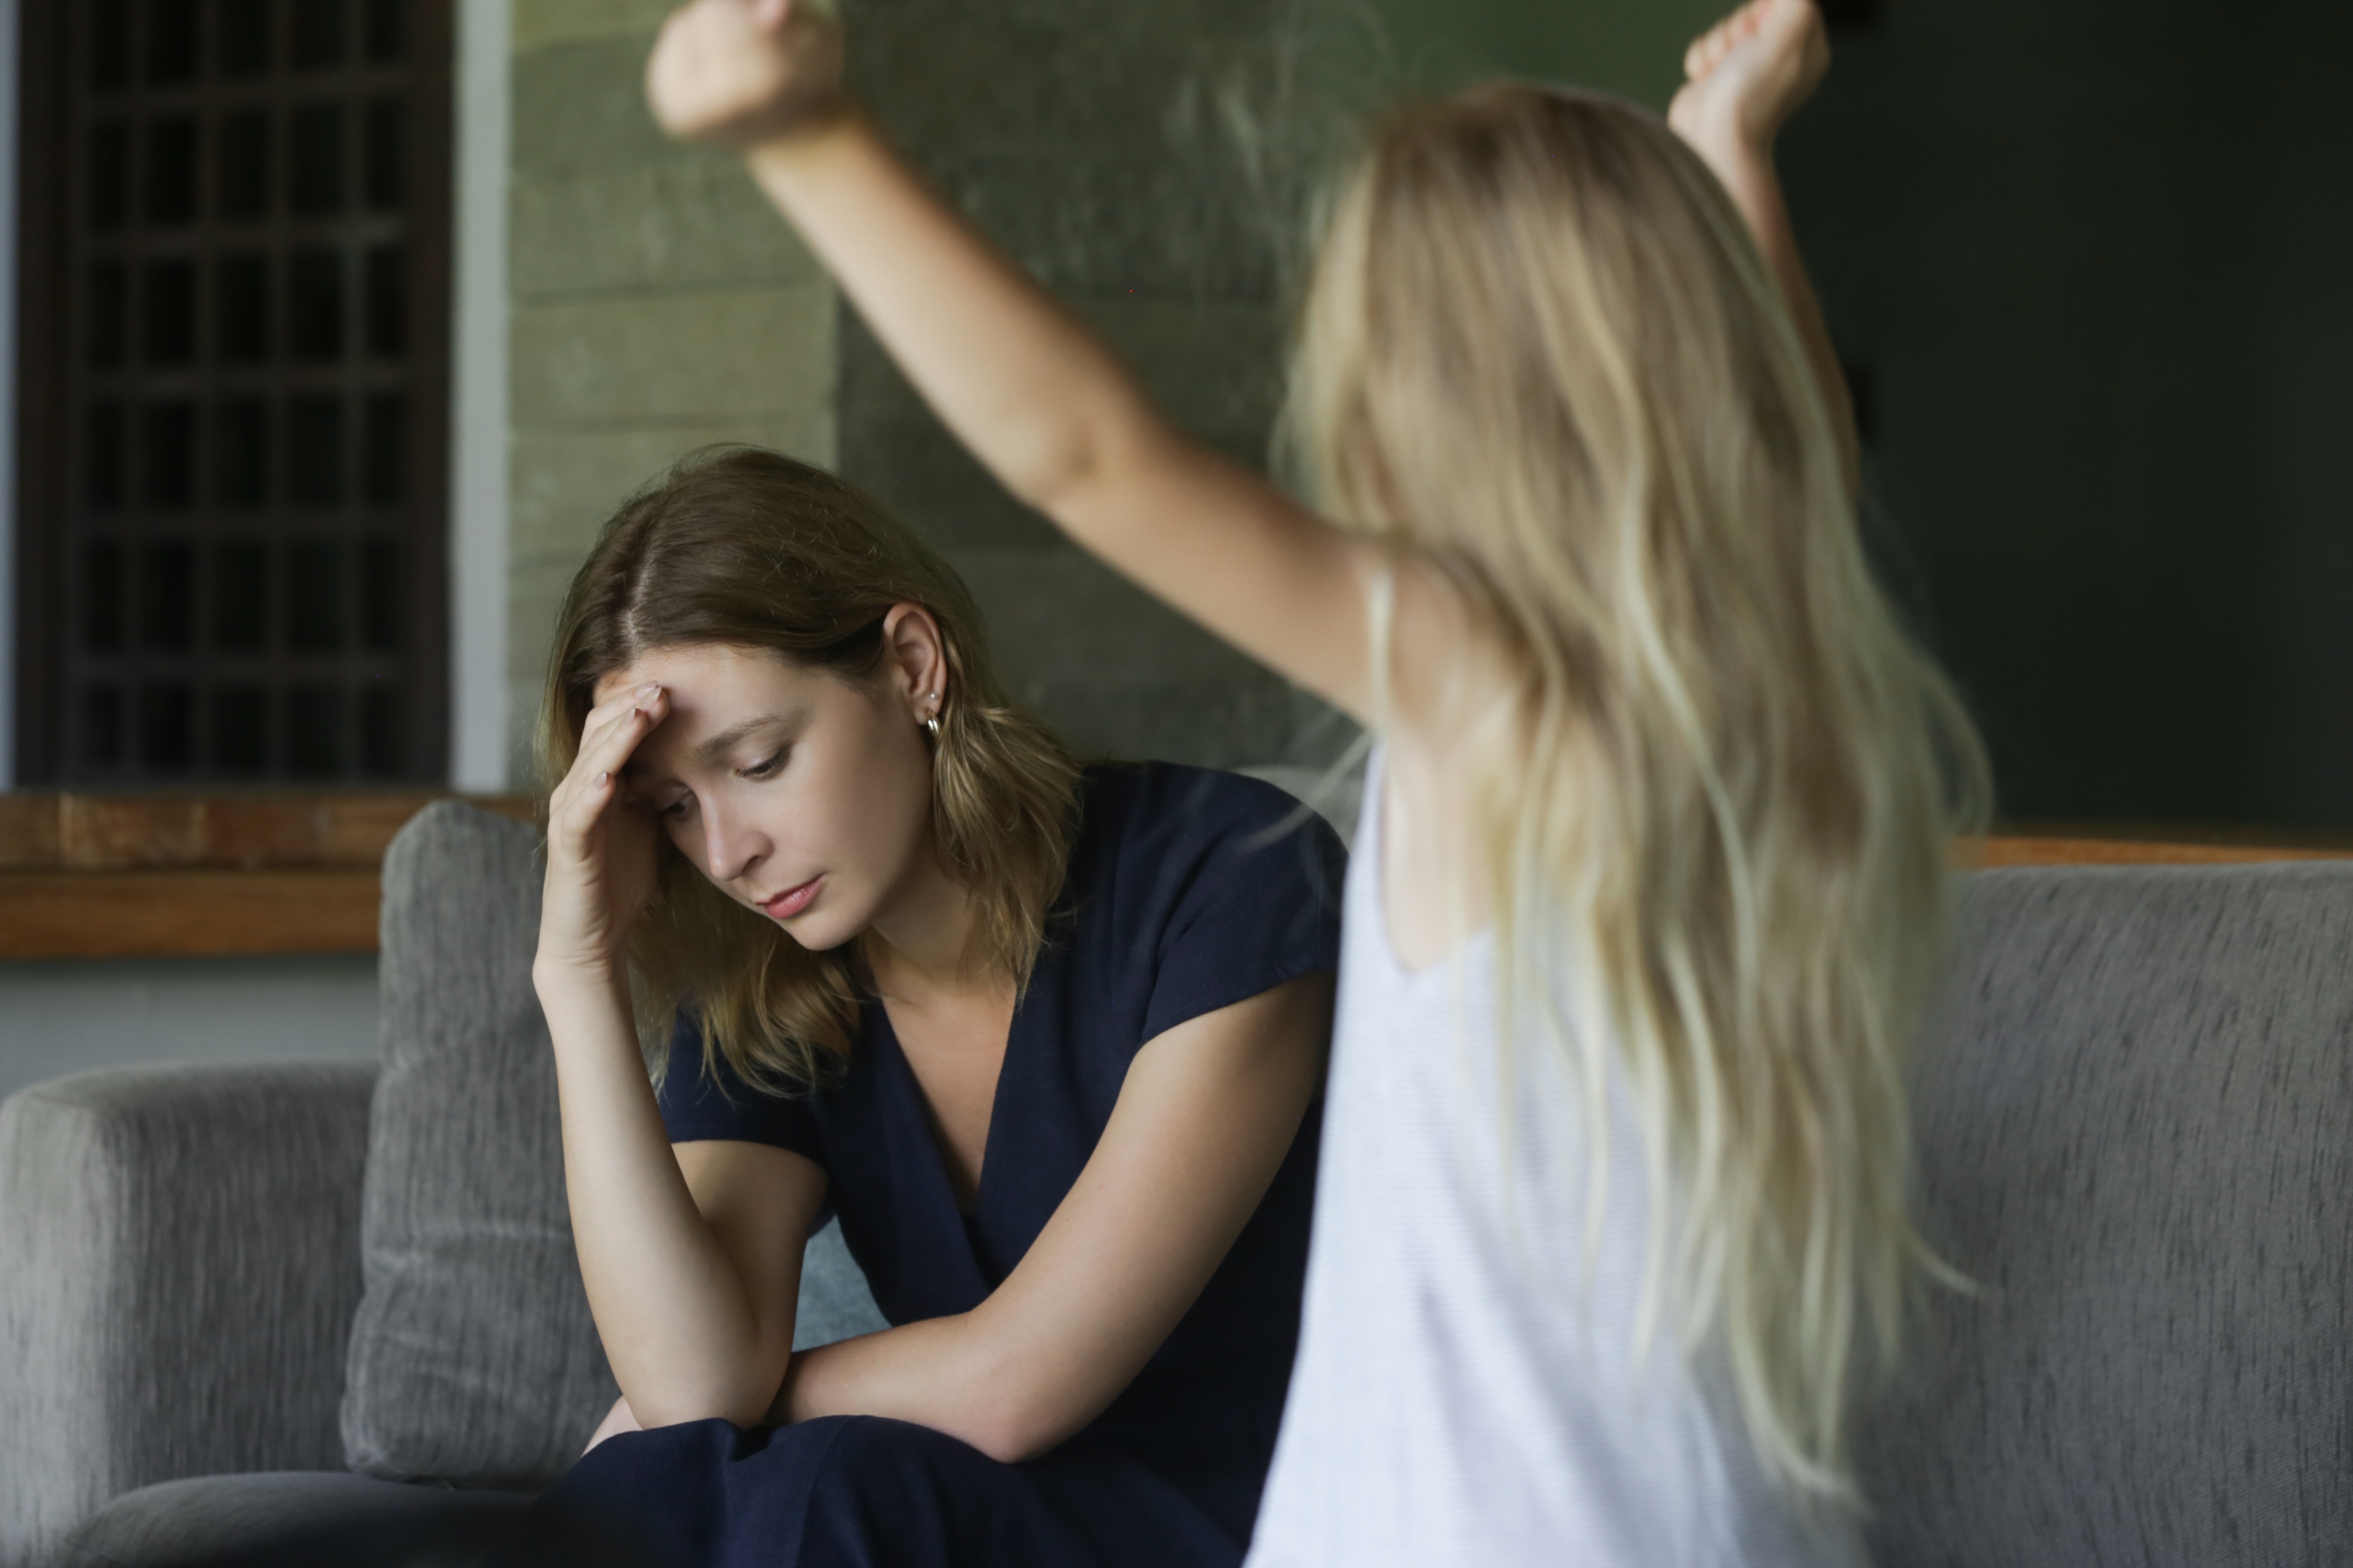 A young girl throwing a tantrum in front of her tired mom | Source: Shutterstock